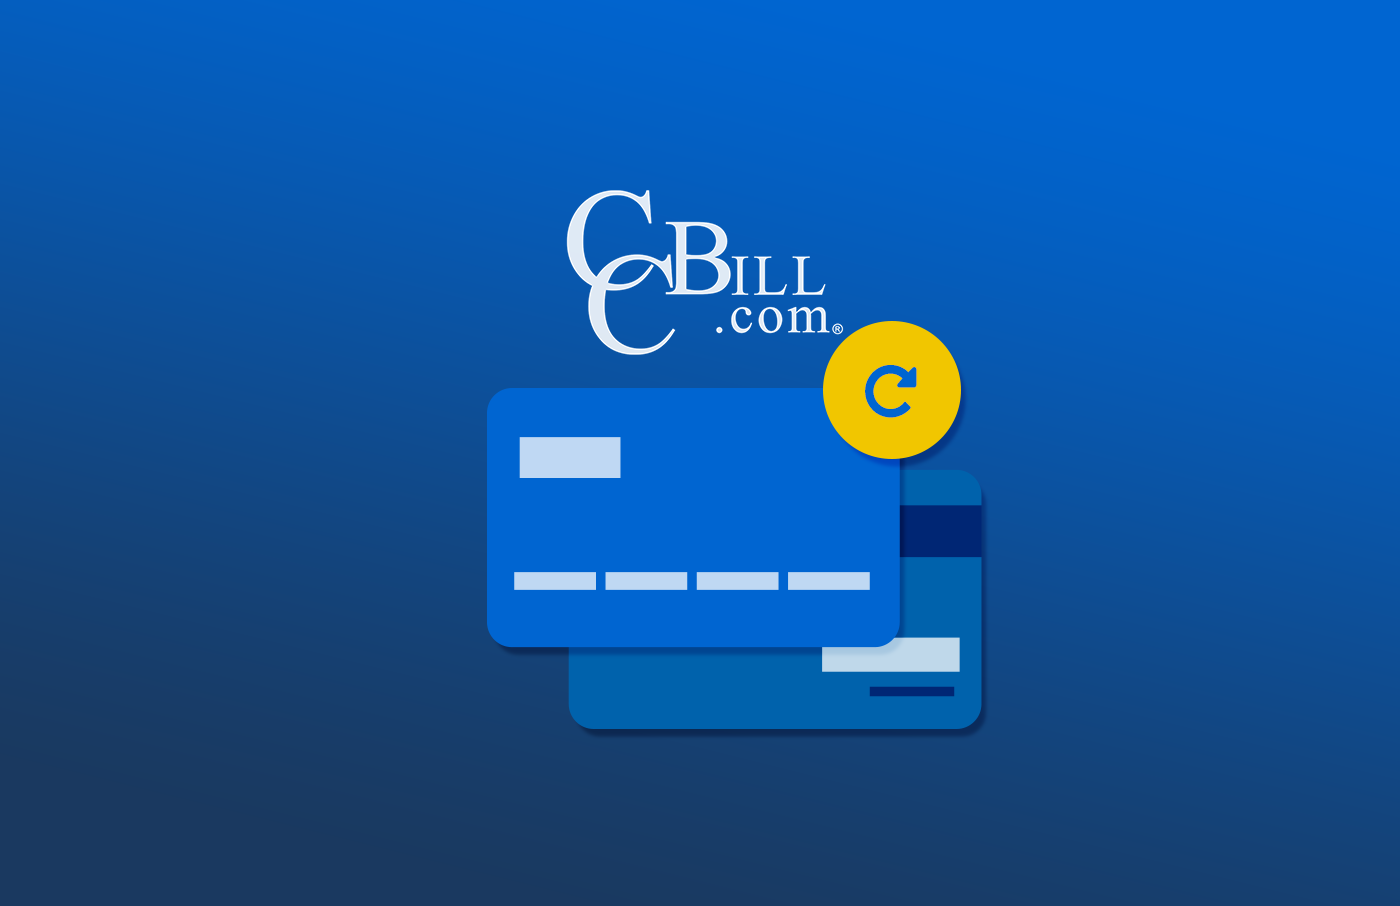 CCBill recurring payments – easy subscriptions management